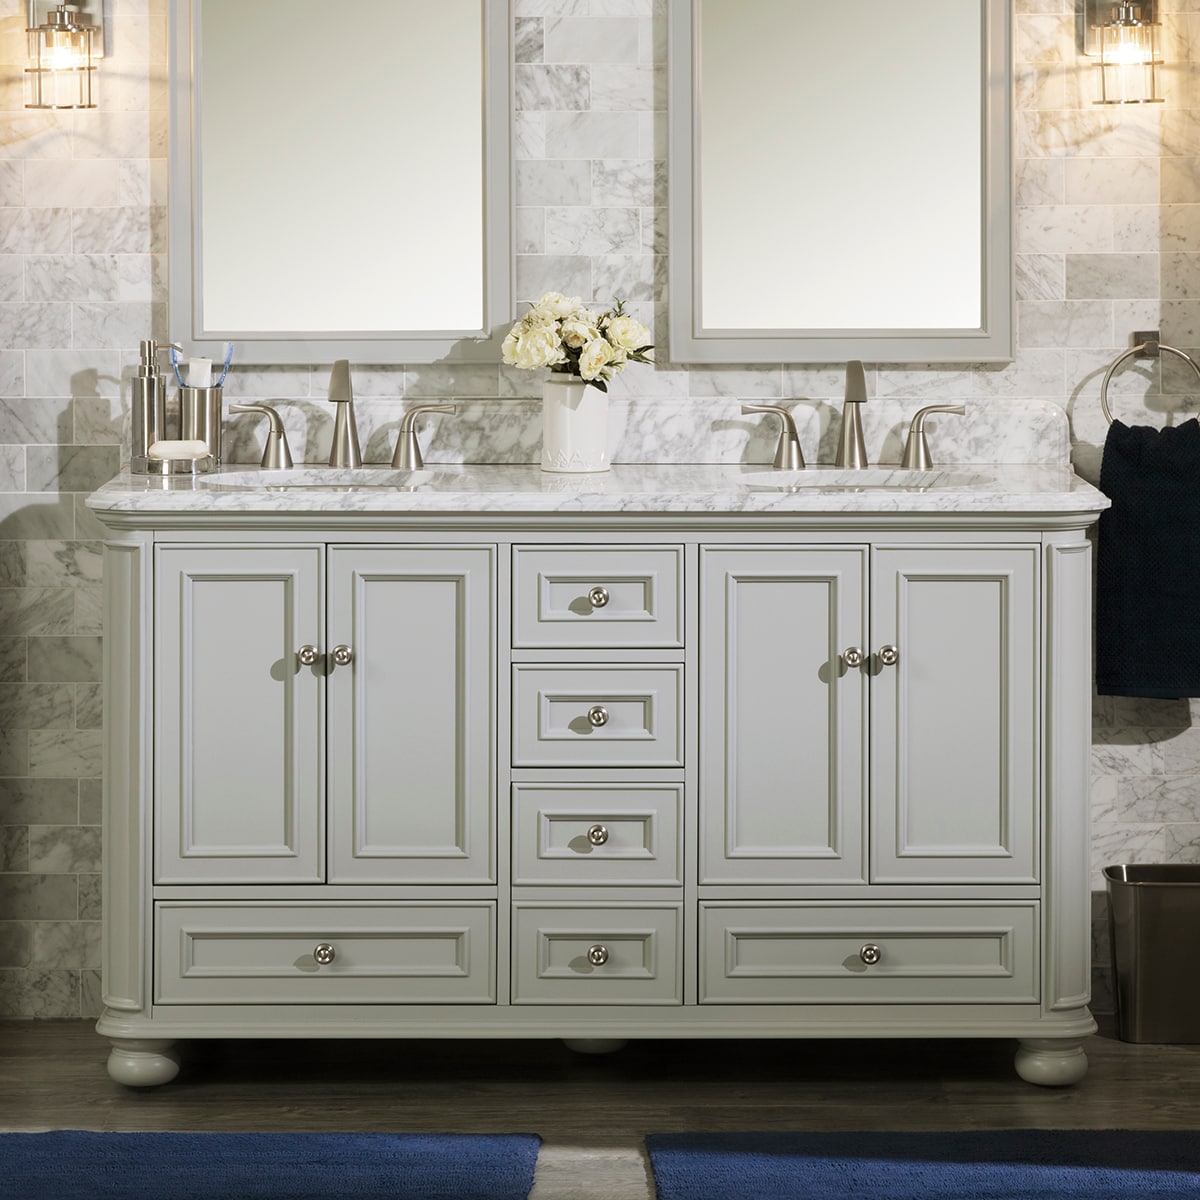 Wrightsville 60-in Light Gray Undermount Double Sink Bathroom Vanity with Carrara Natural Marble Top | - allen + roth 3116VA-60-242-900L